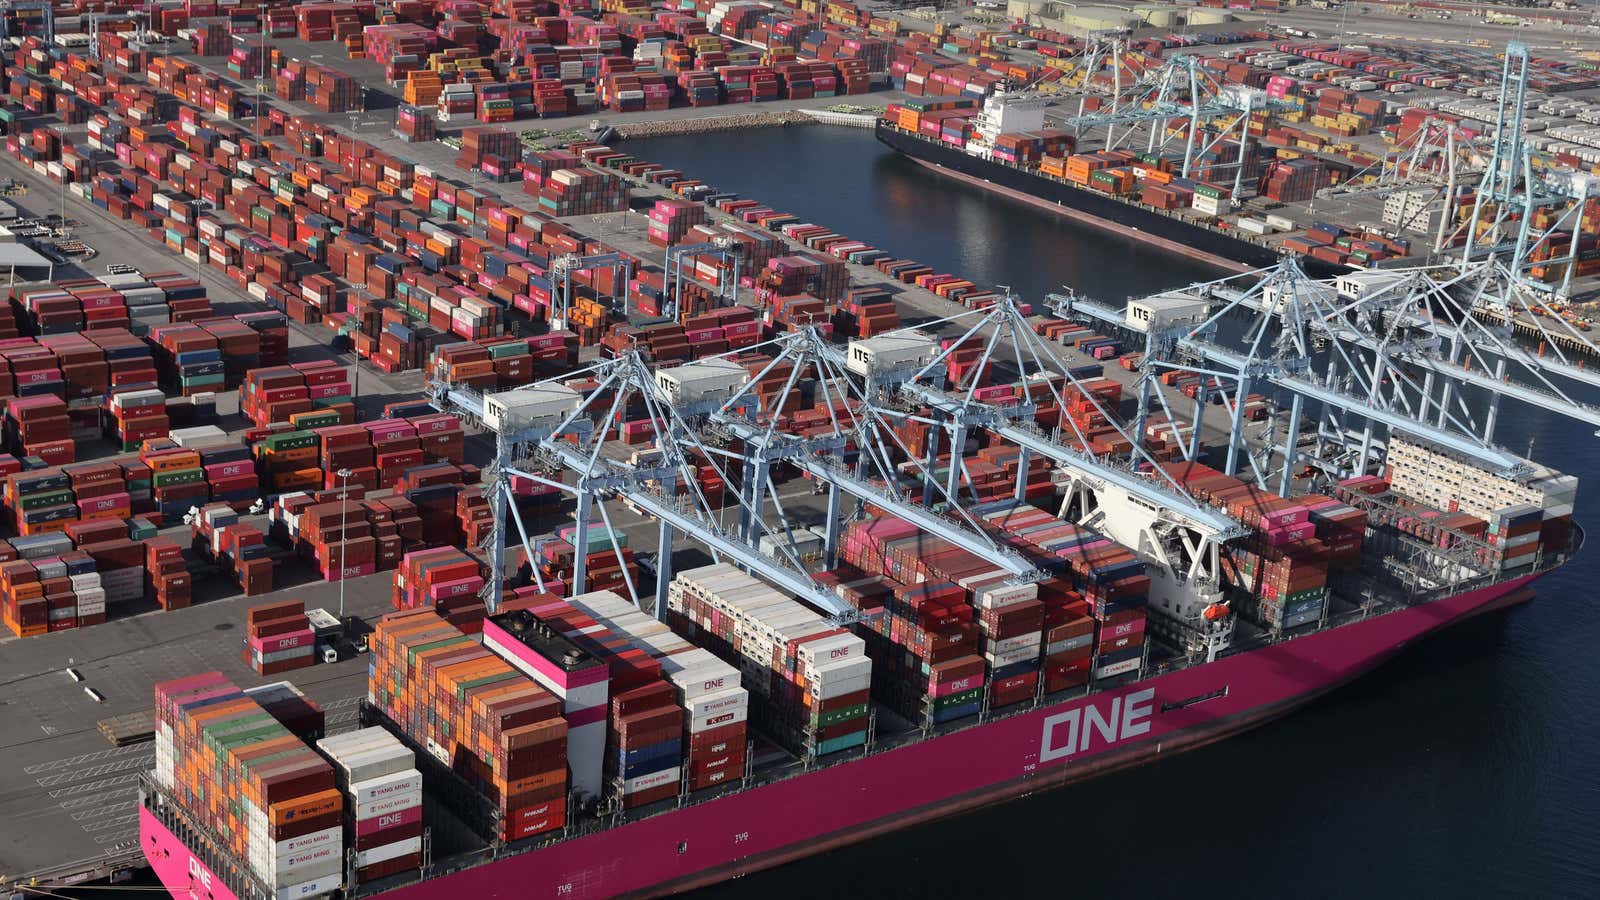 Pop quiz! Can you find space in this congested shipping yard to neatly stack the thousands of containers that need to be unloaded from this ship?